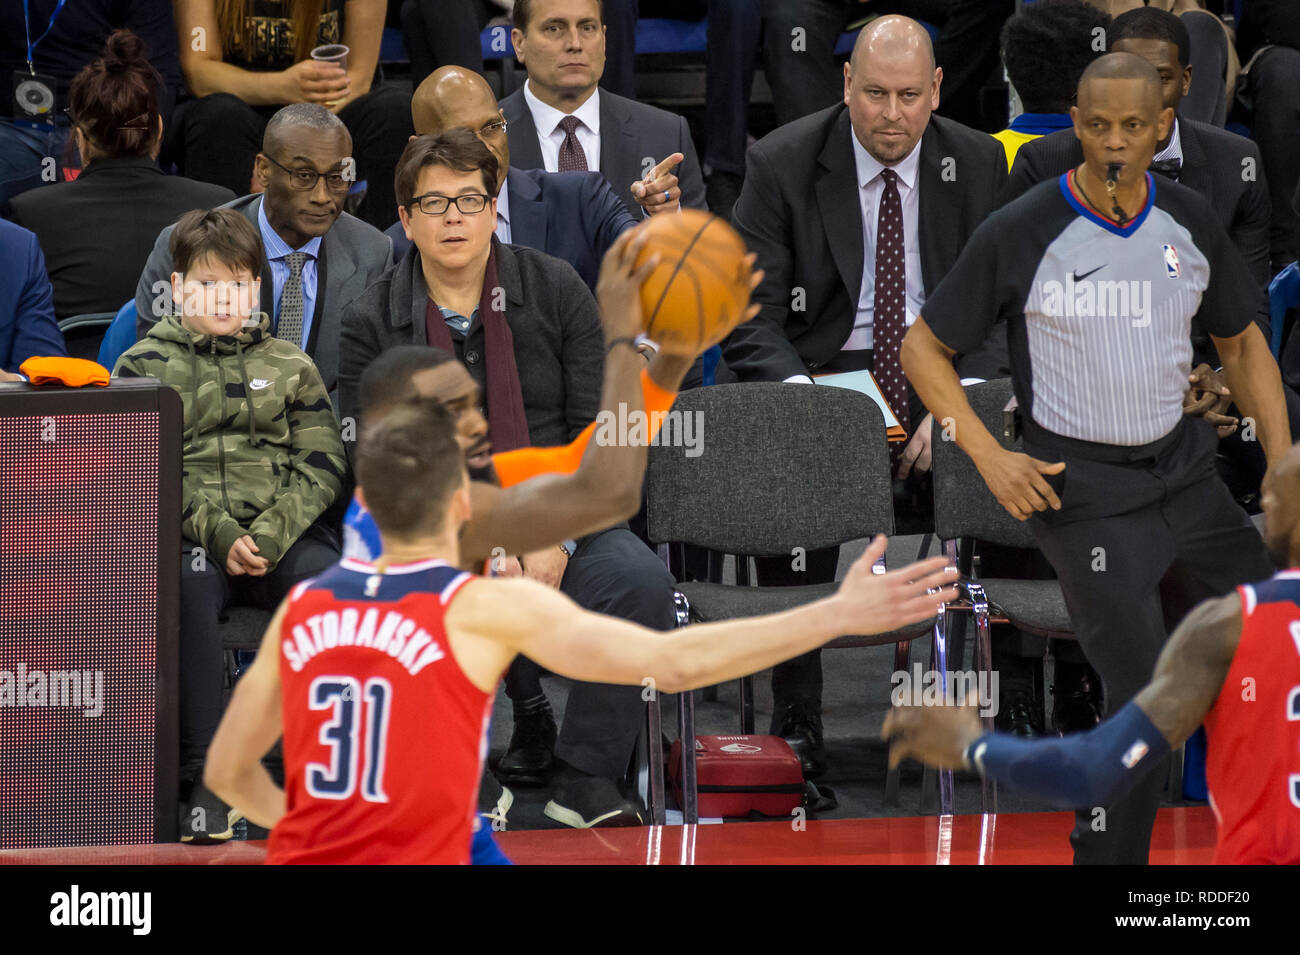 Londo , UK.  17 January 2019. Michael McIntyre (2nd left) and his son Ossie watch an NBA basketball game, NBA London 2019, between Washington Wizards and New York Knicks at the O2 Arena.  Final score: Wizards 101 Knicks 100.  Credit: Stephen Chung / Alamy Live News Stock Photo